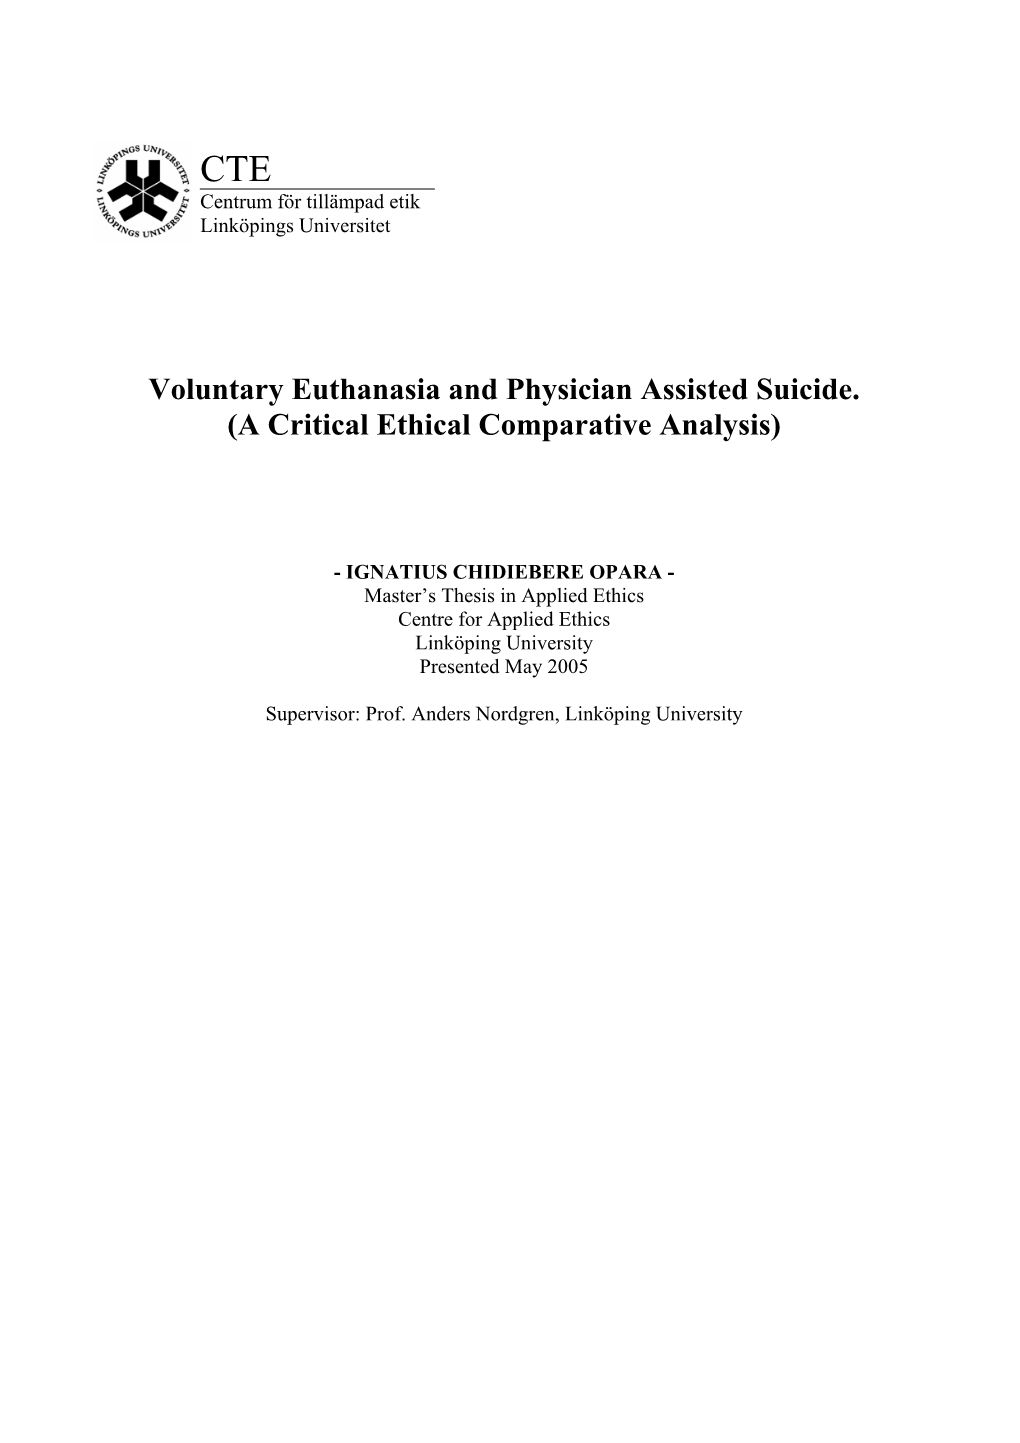 Voluntary Euthanasia and Physician Assisted Suicide. (A Critical Ethical Comparative Analysis)